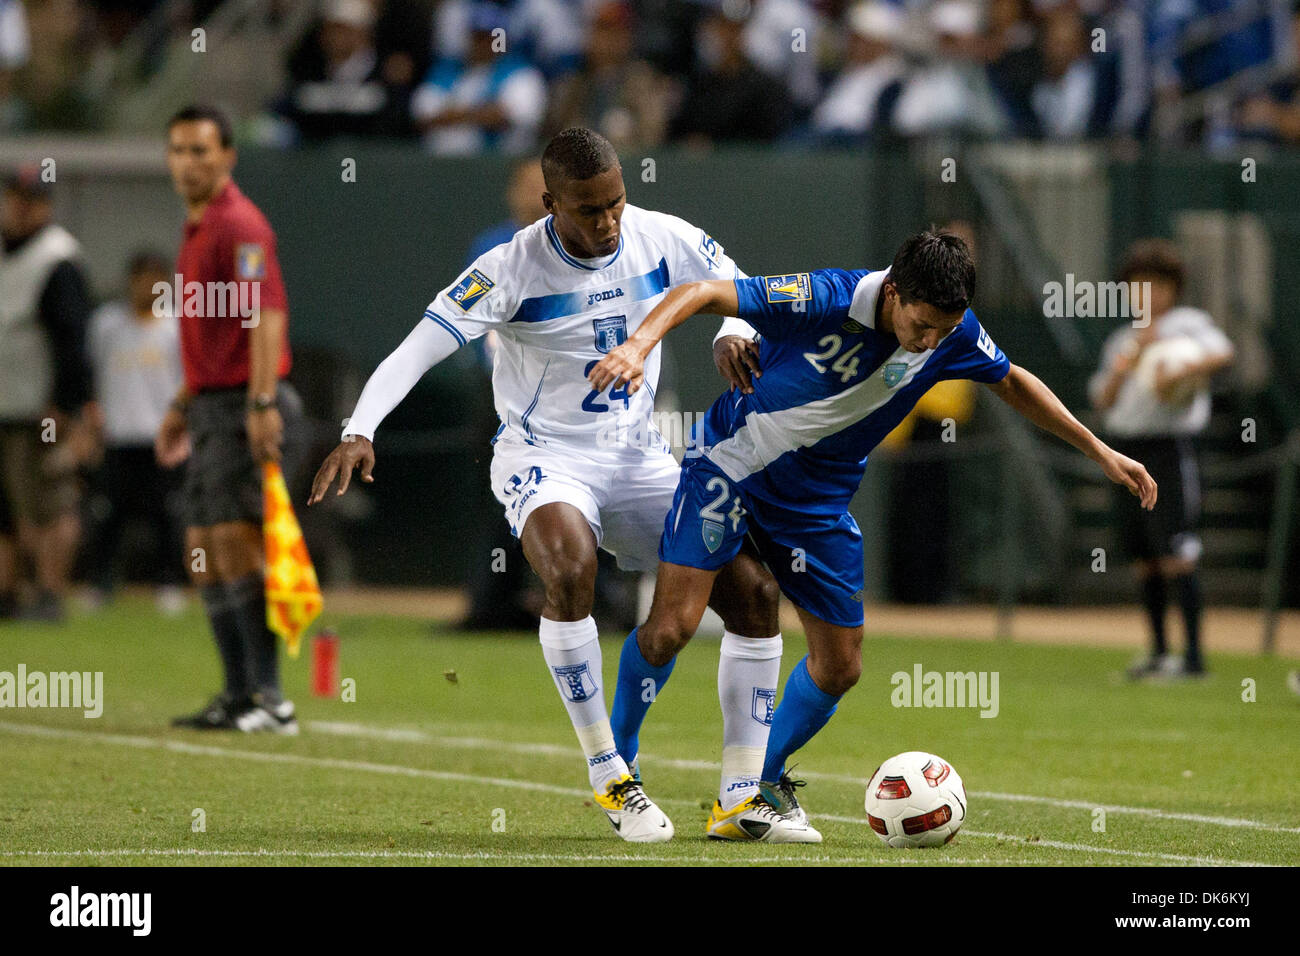 June 6, 2011 - Carson, California, U.S - Honduras Brayan Beckeles defender #24 (L) and Guatemala midfielder Jonathan Lopez #24 (R) in action during the 2011 CONCACAF Gold Cup group B game between Honduras and Guatemala at the Home Depot Center. (Credit Image: © Brandon Parry/Southcreek Global/ZUMAPRESS.com) Stock Photo